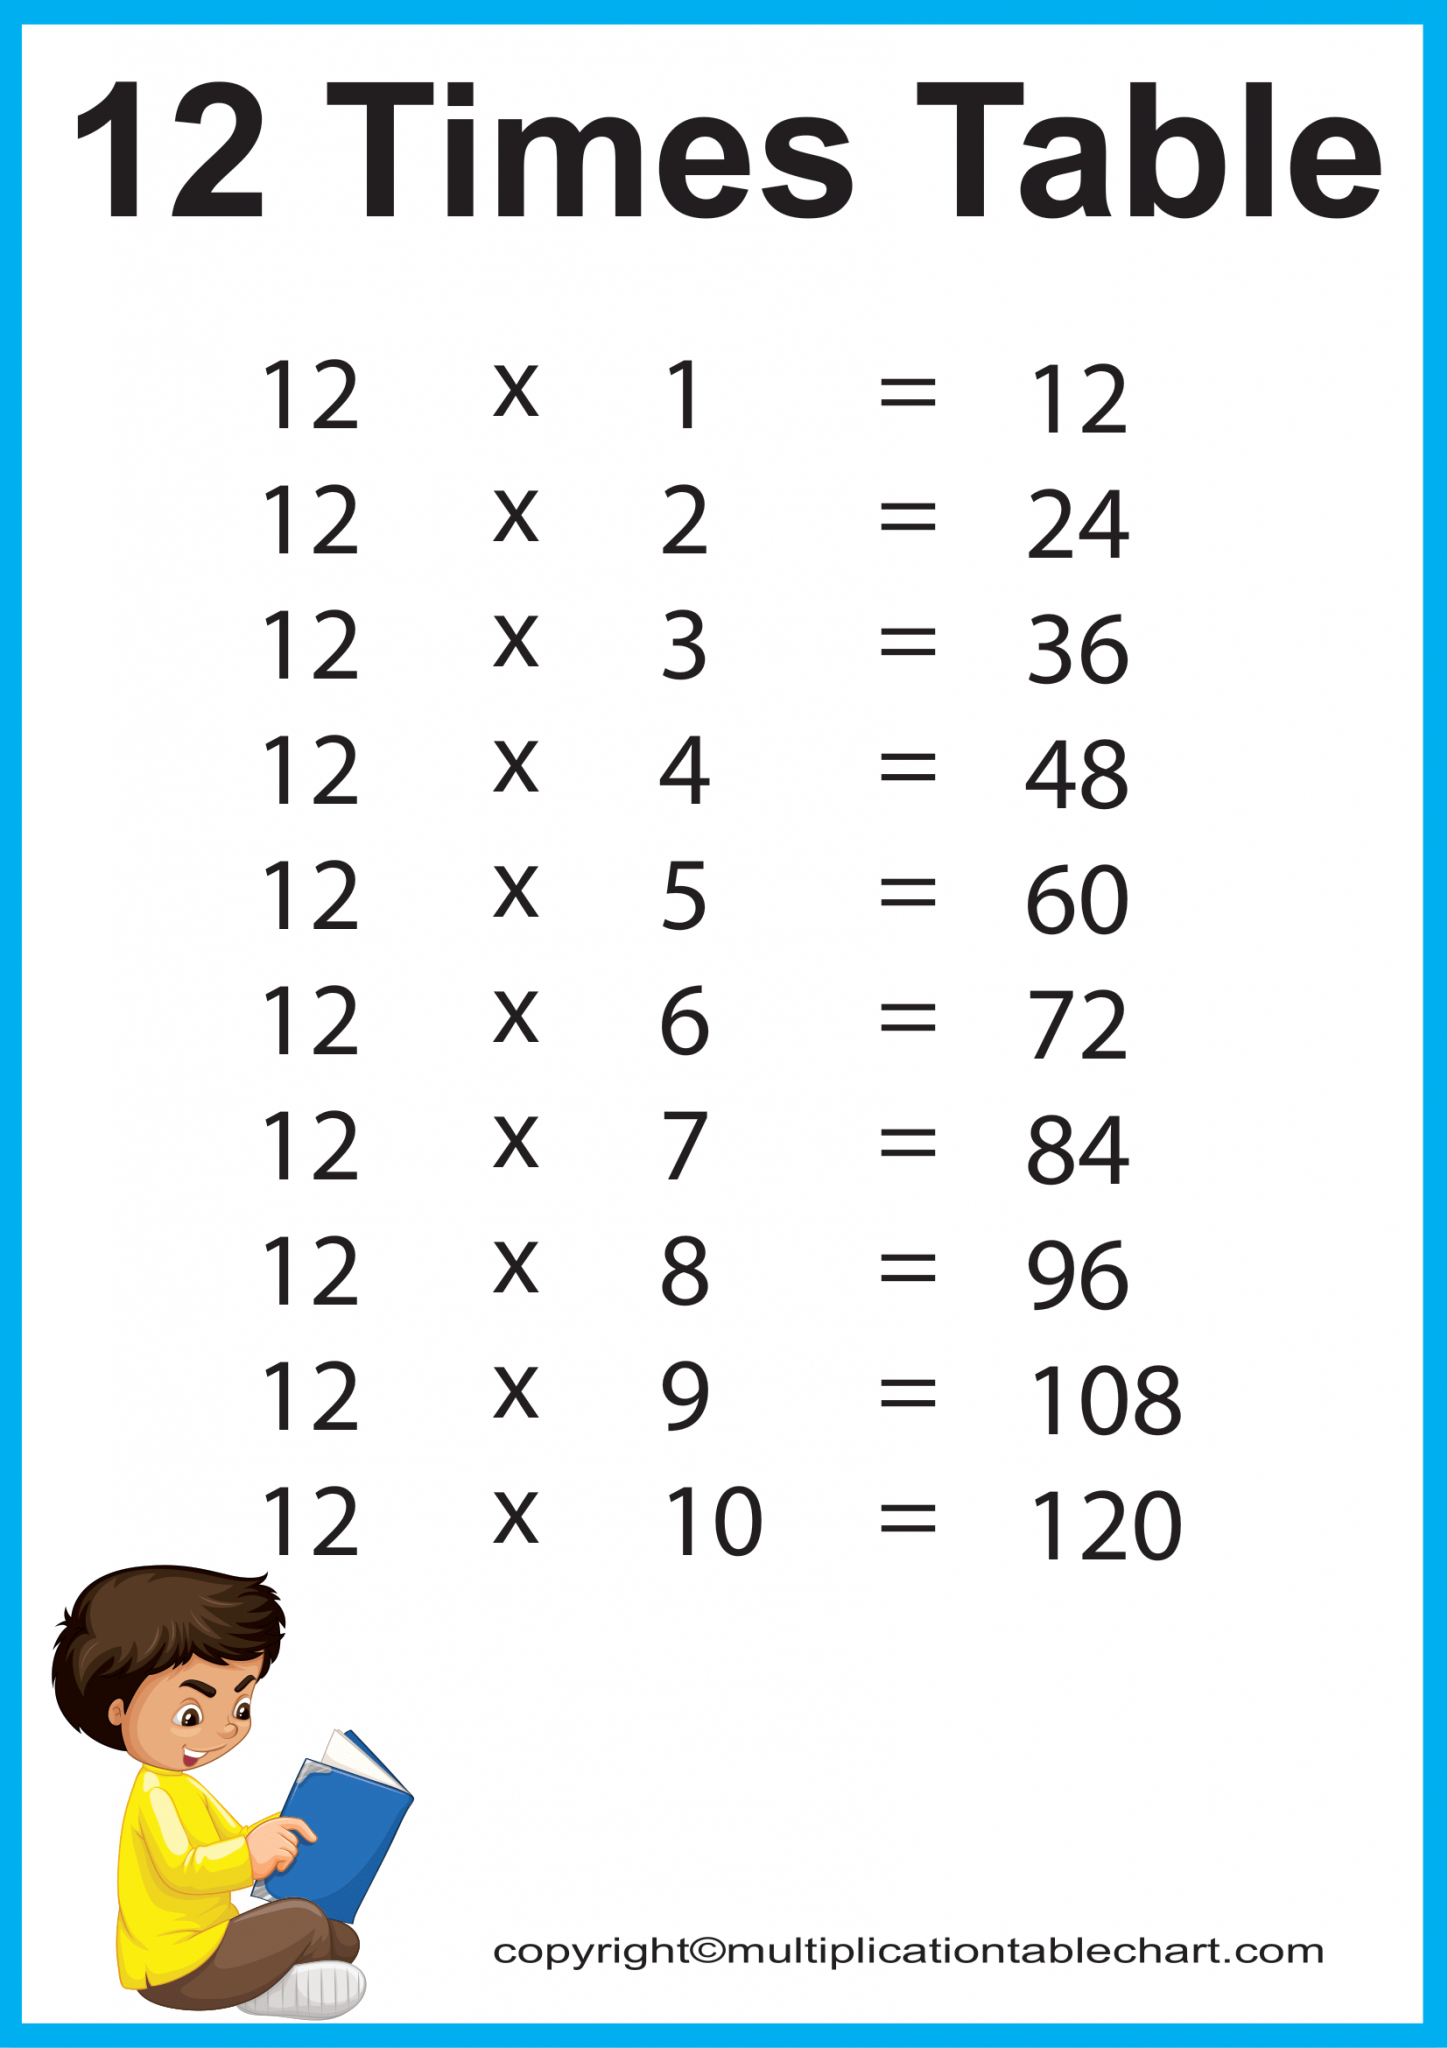 times-table-1-12-multiplication-quiz